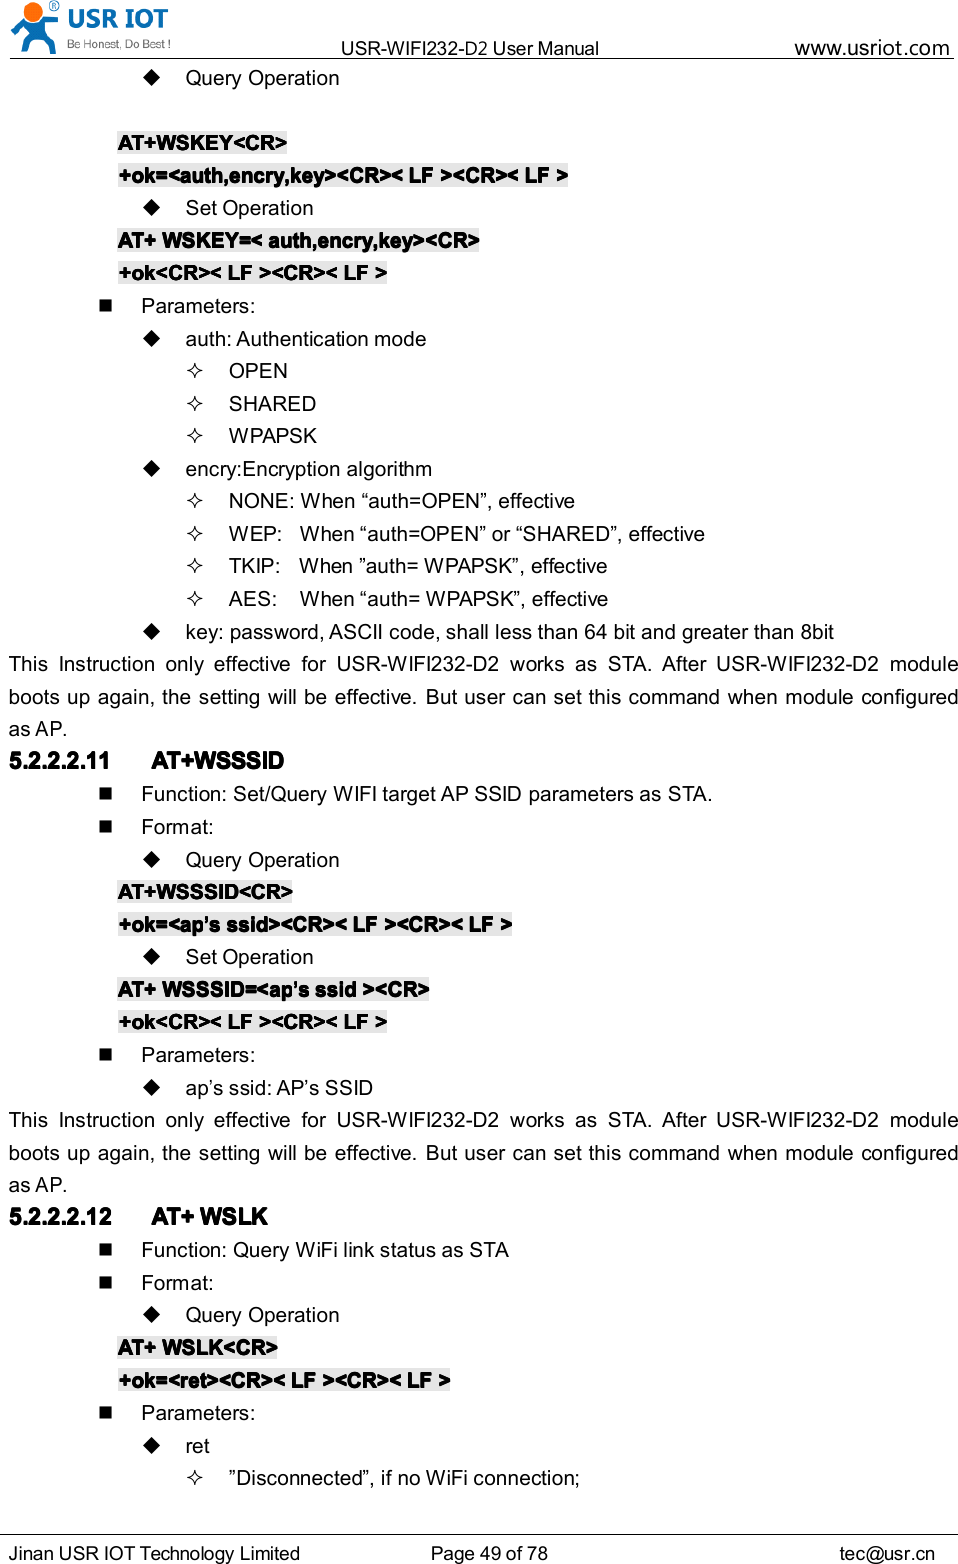 USR-WIFI232- D2 User Manual www.usr iot .comJinan USR IOT Technology Limited Page 49 of 78 tec@usr.cnQuery OperationAT+WSKEY&lt;CR&gt;AT+WSKEY&lt;CR&gt;AT+WSKEY&lt;CR&gt;AT+WSKEY&lt;CR&gt;+ok=&lt;auth,encry,key&gt;&lt;CR&gt;&lt;+ok=&lt;auth,encry,key&gt;&lt;CR&gt;&lt;+ok=&lt;auth,encry,key&gt;&lt;CR&gt;&lt;+ok=&lt;auth,encry,key&gt;&lt;CR&gt;&lt; LFLFLFLF &gt;&lt;CR&gt;&lt;&gt;&lt;CR&gt;&lt;&gt;&lt;CR&gt;&lt;&gt;&lt;CR&gt;&lt; LFLFLFLF &gt;&gt;&gt;&gt;Set OperationAT+AT+AT+AT+ WSKEY=&lt;WSKEY=&lt;WSKEY=&lt;WSKEY=&lt; auth,encry,key&gt;&lt;CR&gt;auth,encry,key&gt;&lt;CR&gt;auth,encry,key&gt;&lt;CR&gt;auth,encry,key&gt;&lt;CR&gt;+ok&lt;CR&gt;&lt;+ok&lt;CR&gt;&lt;+ok&lt;CR&gt;&lt;+ok&lt;CR&gt;&lt; LFLFLFLF &gt;&lt;CR&gt;&lt;&gt;&lt;CR&gt;&lt;&gt;&lt;CR&gt;&lt;&gt;&lt;CR&gt;&lt; LFLFLFLF &gt;&gt;&gt;&gt;Parameters:auth: Authentication modeOPENSHAREDWPAPSKencry:Encryption algorithmNONE: When “ auth=OPEN ” , effectiveWEP: When “ auth=OPEN ” or “ SHARED ” , effectiveTKIP: When ” auth= WPAPSK ” , effectiveAES: When “ auth= WPAPSK ” , effectivekey: password, ASCII code, shall less than 64 bit and greater than 8bitThis Instruction only effective for USR-WIFI232-D2 works as STA. After USR-WIFI232-D2 moduleboots up again, the setting will be effective. But user can set this command when module configuredasAP.5.2.2.2.115.2.2.2.115.2.2.2.115.2.2.2.11 AT+WSSSIDAT+WSSSIDAT+WSSSIDAT+WSSSIDFunction: Set/Query WIFI target AP SSID parameters as STA.Format:Query OperationAT+WSSSID&lt;CR&gt;AT+WSSSID&lt;CR&gt;AT+WSSSID&lt;CR&gt;AT+WSSSID&lt;CR&gt;+ok=&lt;ap+ok=&lt;ap+ok=&lt;ap+ok=&lt;ap’’’’ssss ssid&gt;&lt;CR&gt;&lt;ssid&gt;&lt;CR&gt;&lt;ssid&gt;&lt;CR&gt;&lt;ssid&gt;&lt;CR&gt;&lt; LFLFLFLF &gt;&lt;CR&gt;&lt;&gt;&lt;CR&gt;&lt;&gt;&lt;CR&gt;&lt;&gt;&lt;CR&gt;&lt; LFLFLFLF &gt;&gt;&gt;&gt;Set OperationAT+AT+AT+AT+ WSSSID=&lt;apWSSSID=&lt;apWSSSID=&lt;apWSSSID=&lt;ap’’’’ssss ssidssidssidssid &gt;&lt;CR&gt;&gt;&lt;CR&gt;&gt;&lt;CR&gt;&gt;&lt;CR&gt;+ok&lt;CR&gt;&lt;+ok&lt;CR&gt;&lt;+ok&lt;CR&gt;&lt;+ok&lt;CR&gt;&lt; LFLFLFLF &gt;&lt;CR&gt;&lt;&gt;&lt;CR&gt;&lt;&gt;&lt;CR&gt;&lt;&gt;&lt;CR&gt;&lt; LFLFLFLF &gt;&gt;&gt;&gt;Parameters:ap’s ssid: AP ’ s SSIDThis Instruction only effective for USR-WIFI232-D2 works as STA. After USR-WIFI232-D2 moduleboots up again, the setting will be effective. But user can set this command when module configuredasAP.5.2.2.2.125.2.2.2.125.2.2.2.125.2.2.2.12 AT+AT+AT+AT+ WSLKWSLKWSLKWSLKFunction: Query WiFi link status as STAFormat:Query OperationAT+AT+AT+AT+ WSLK&lt;CR&gt;WSLK&lt;CR&gt;WSLK&lt;CR&gt;WSLK&lt;CR&gt;+ok=&lt;ret&gt;&lt;CR&gt;&lt;+ok=&lt;ret&gt;&lt;CR&gt;&lt;+ok=&lt;ret&gt;&lt;CR&gt;&lt;+ok=&lt;ret&gt;&lt;CR&gt;&lt; LFLFLFLF &gt;&lt;CR&gt;&lt;&gt;&lt;CR&gt;&lt;&gt;&lt;CR&gt;&lt;&gt;&lt;CR&gt;&lt; LFLFLFLF &gt;&gt;&gt;&gt;Parameters:ret” Disconnected ” , if no WiFi connection;